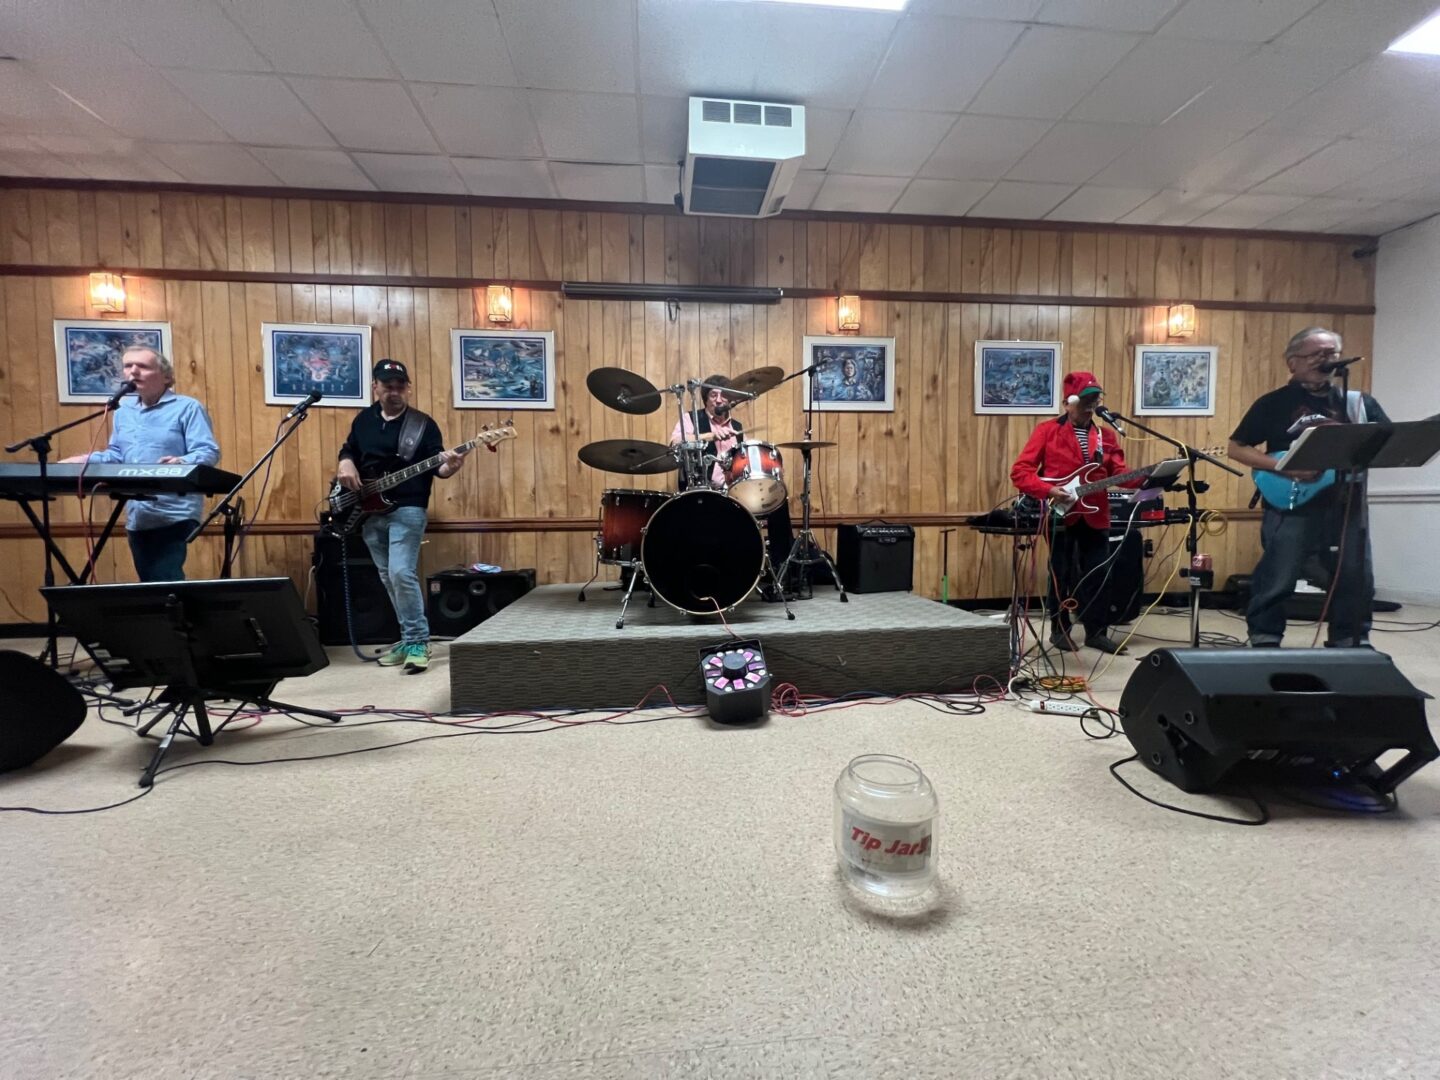 A band performs in a room with wooden walls.